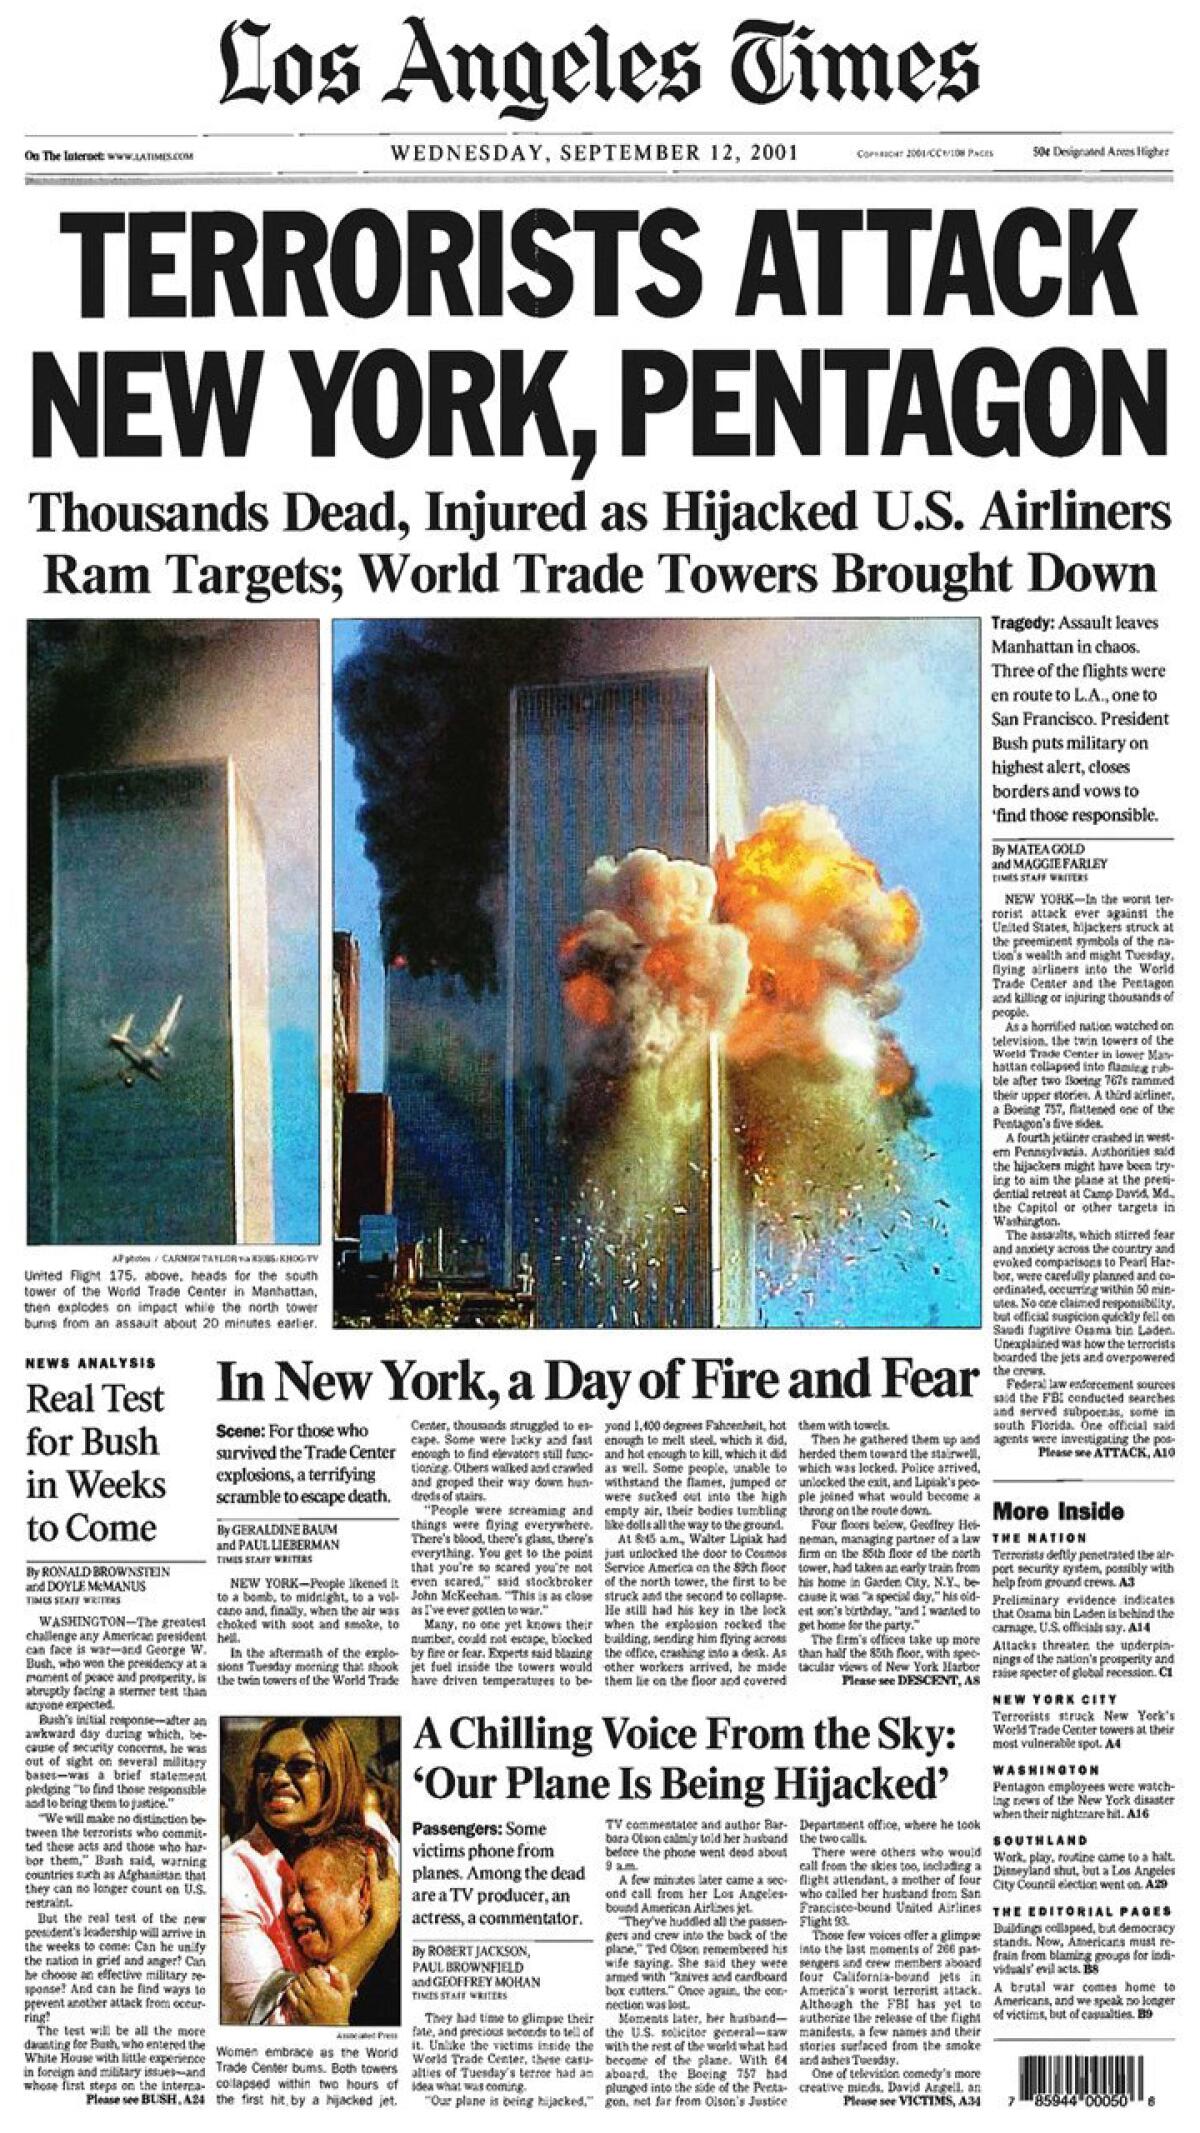 Front page of the L.A. Times the day after the 9/11 attacks